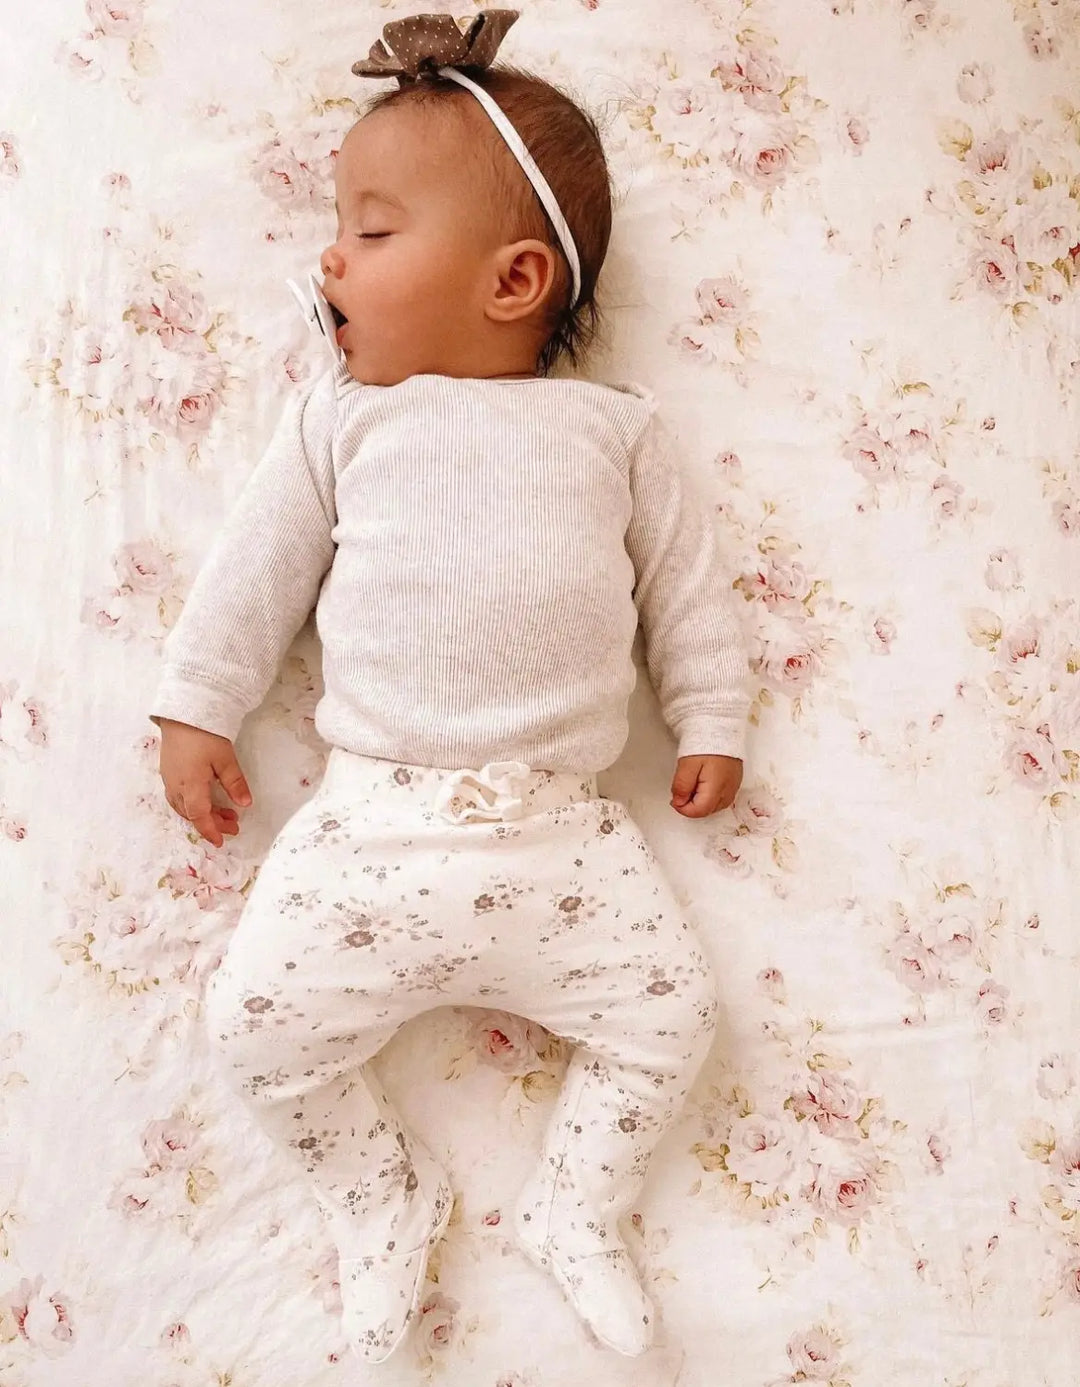 The Comfortable Choice: Why 100% Cotton Crib Sheets Are Best for Your Baby